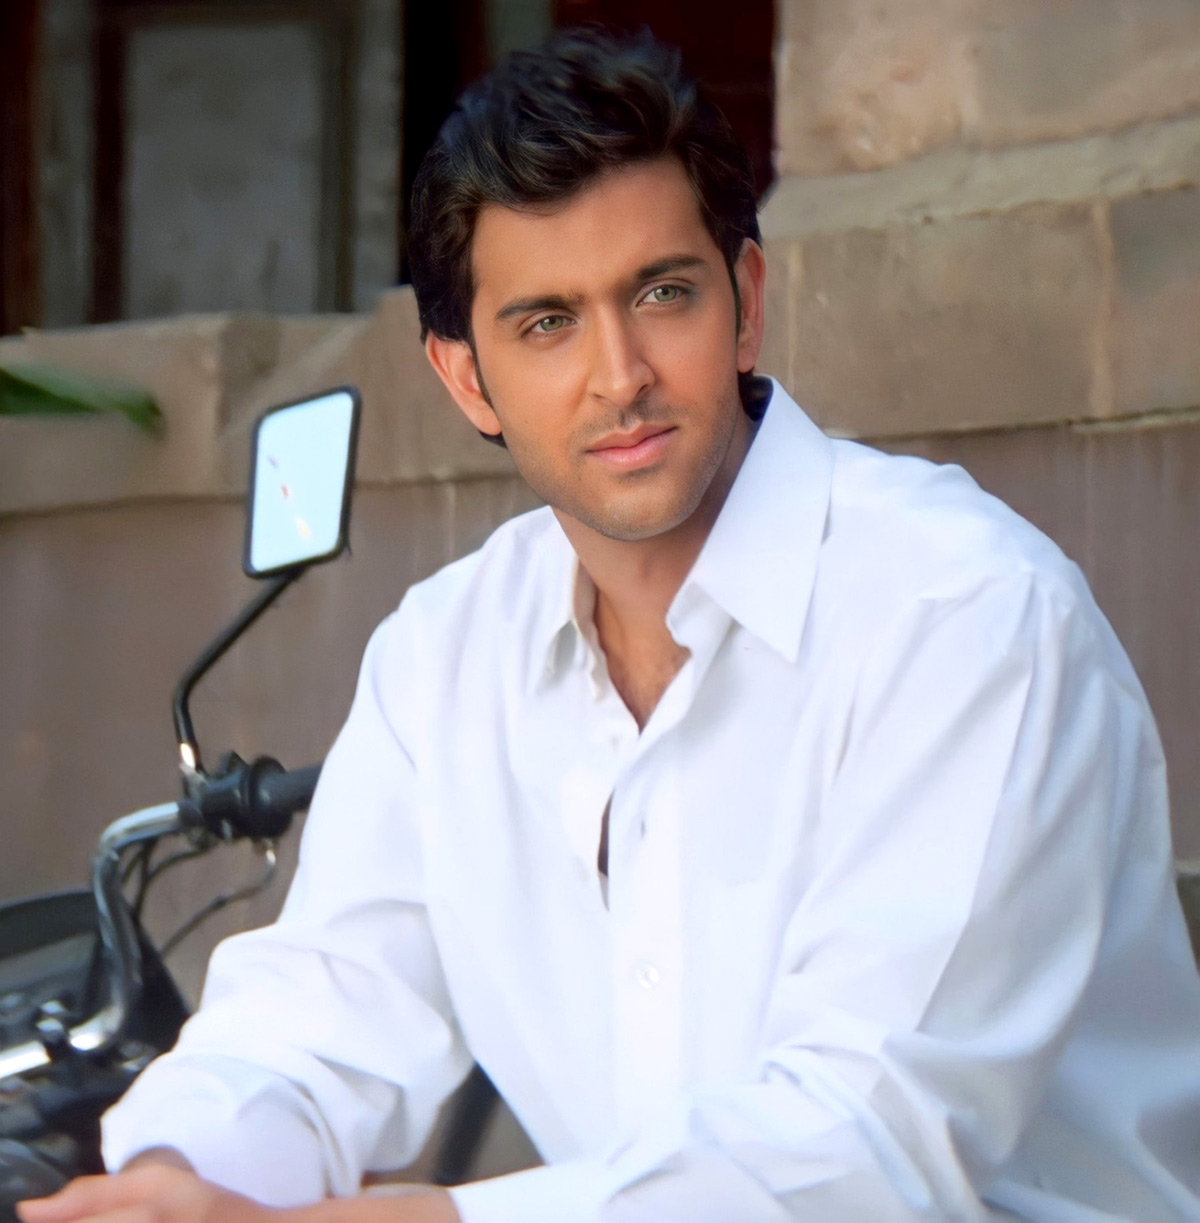 The Hrithik Roshan You Don’t Know